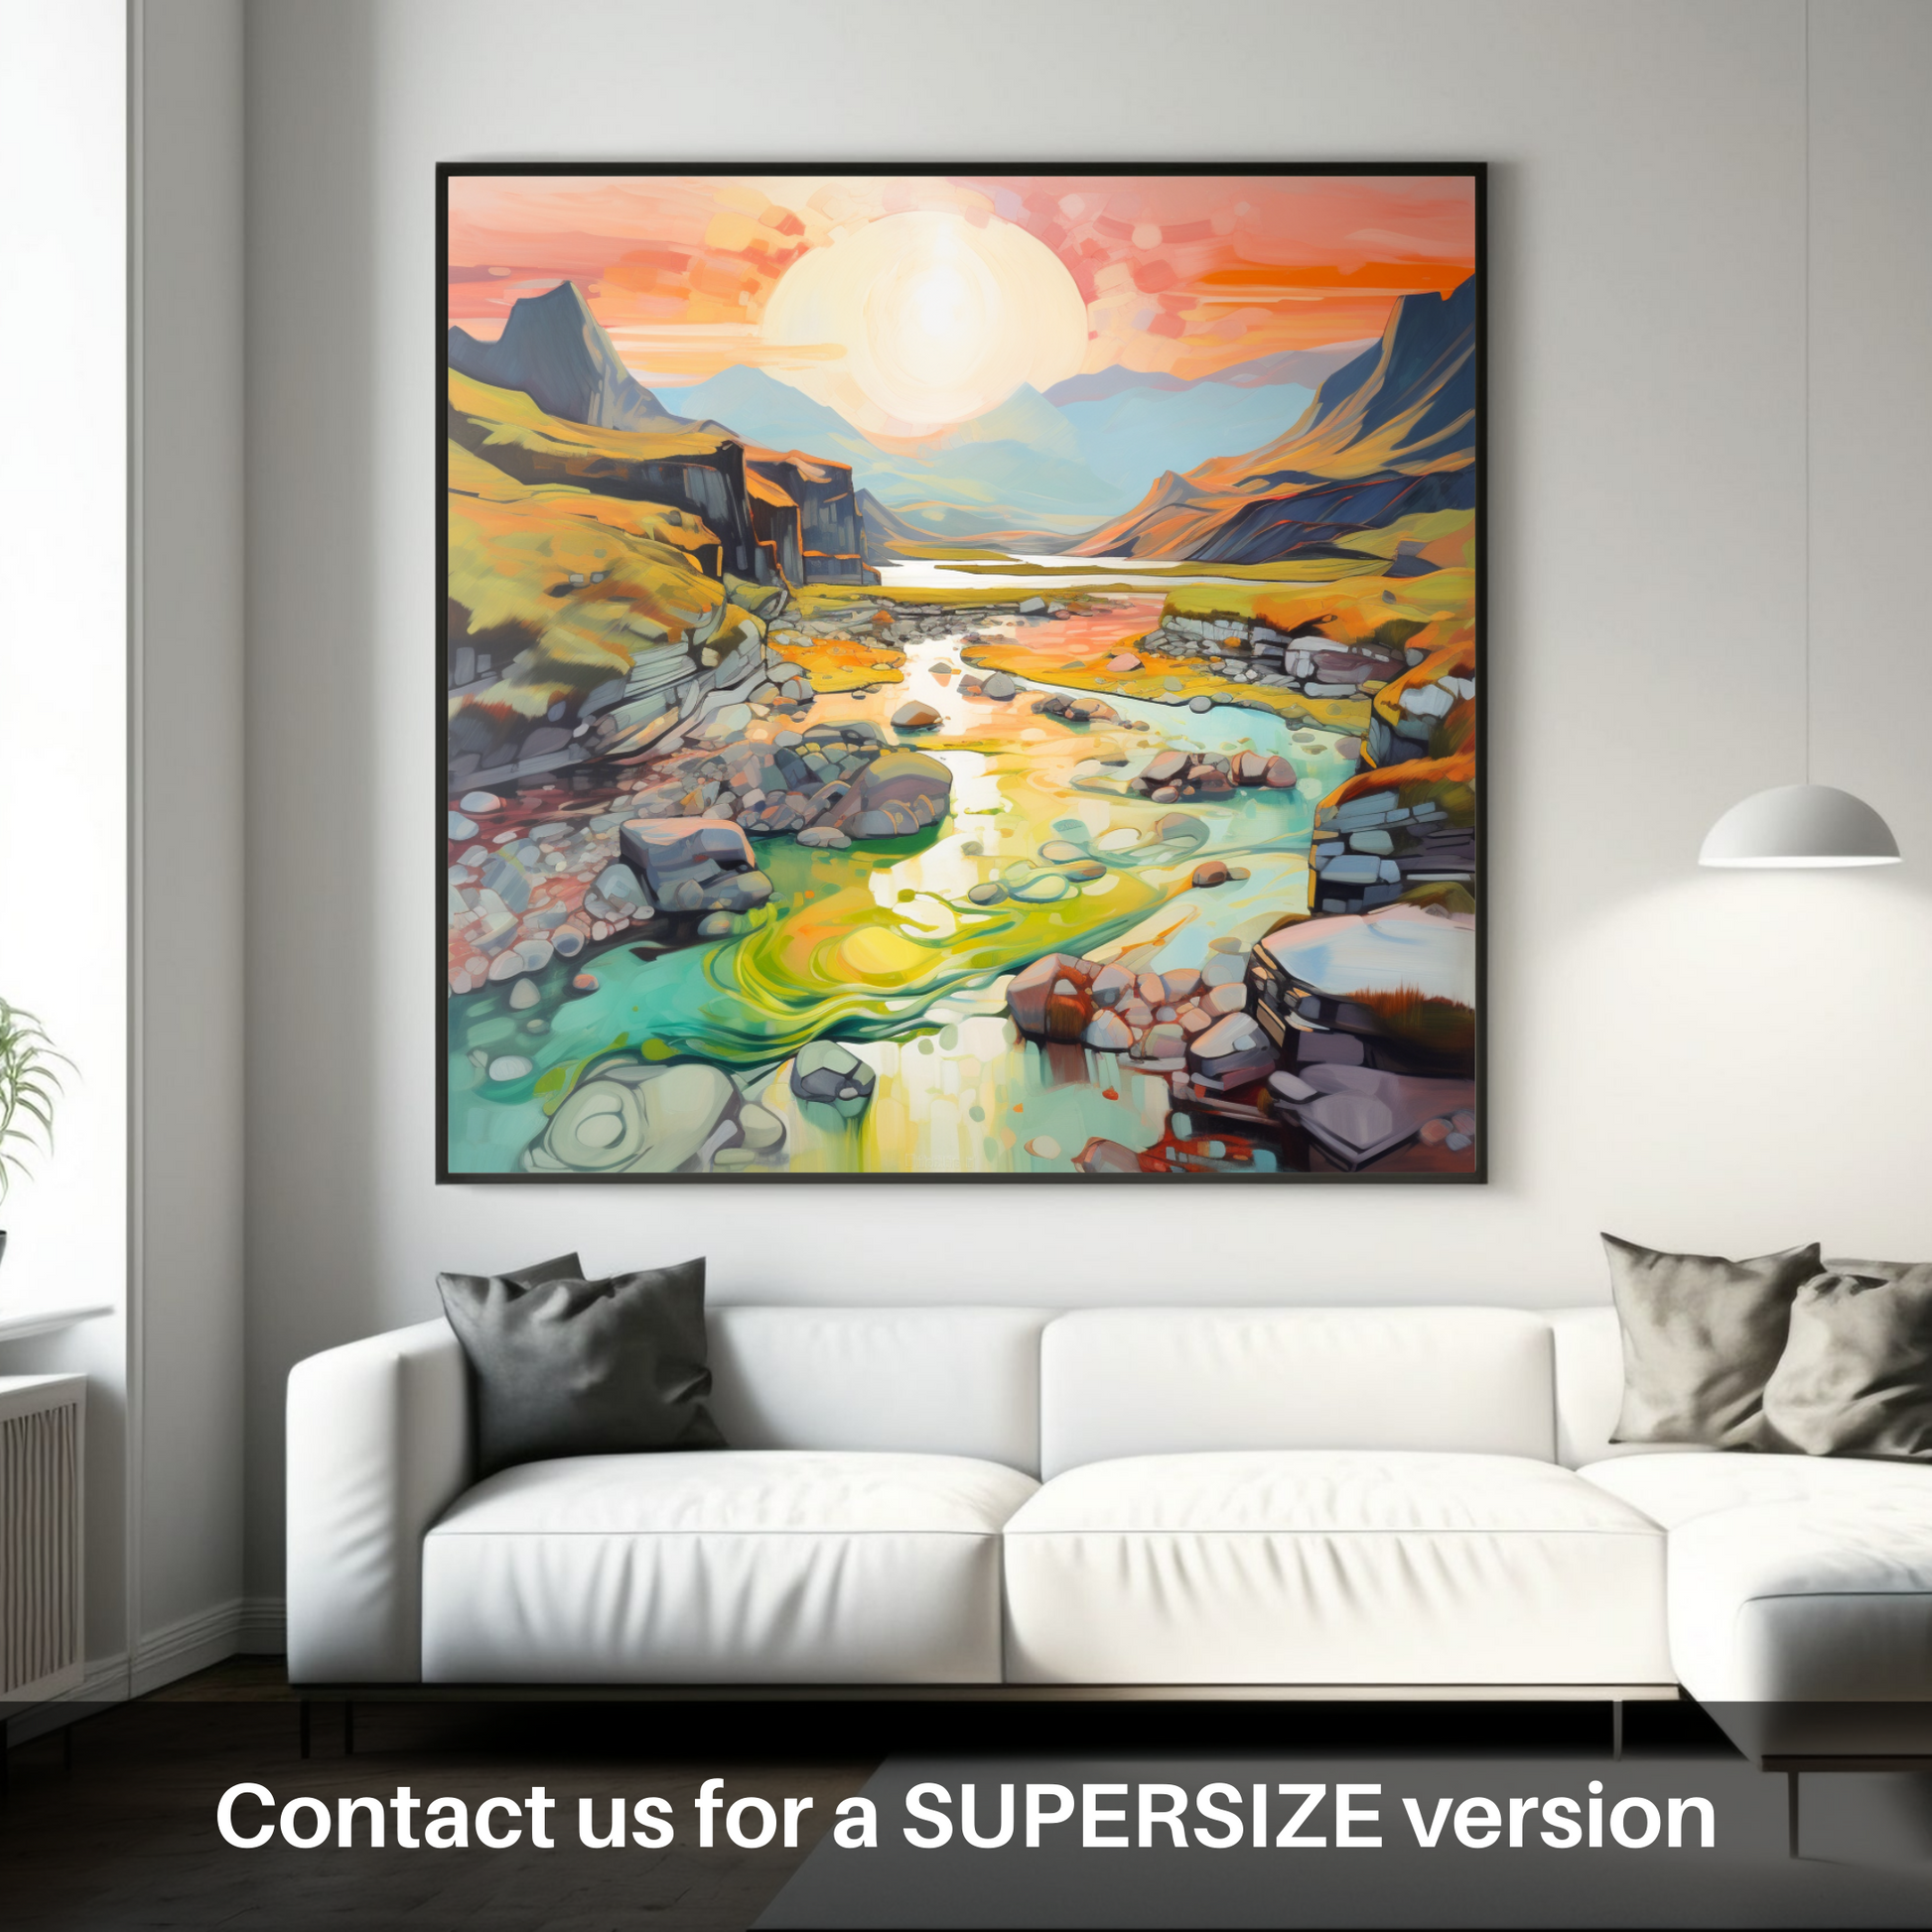 Huge supersize print of Isle of Skye Fairy Pools at golden hour in summer